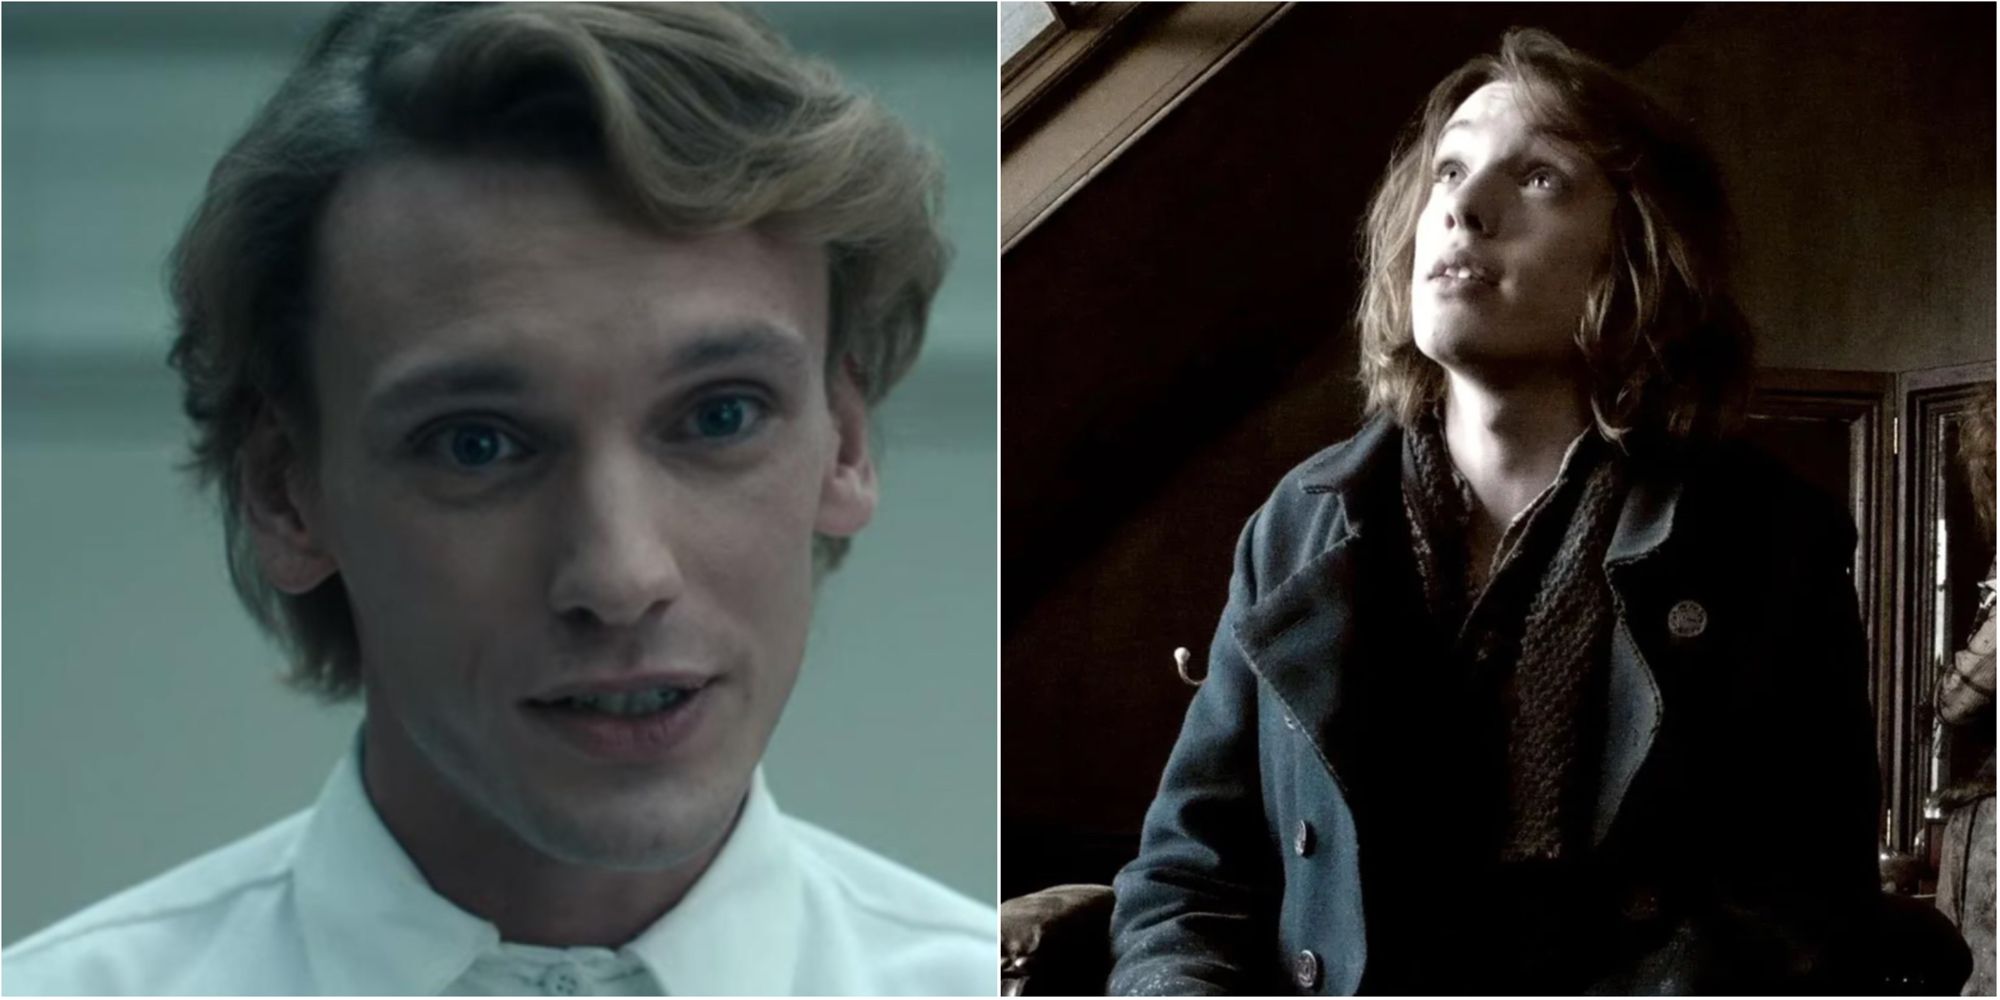 JAmie campbel Bower as 001 and Henry and  Anthony